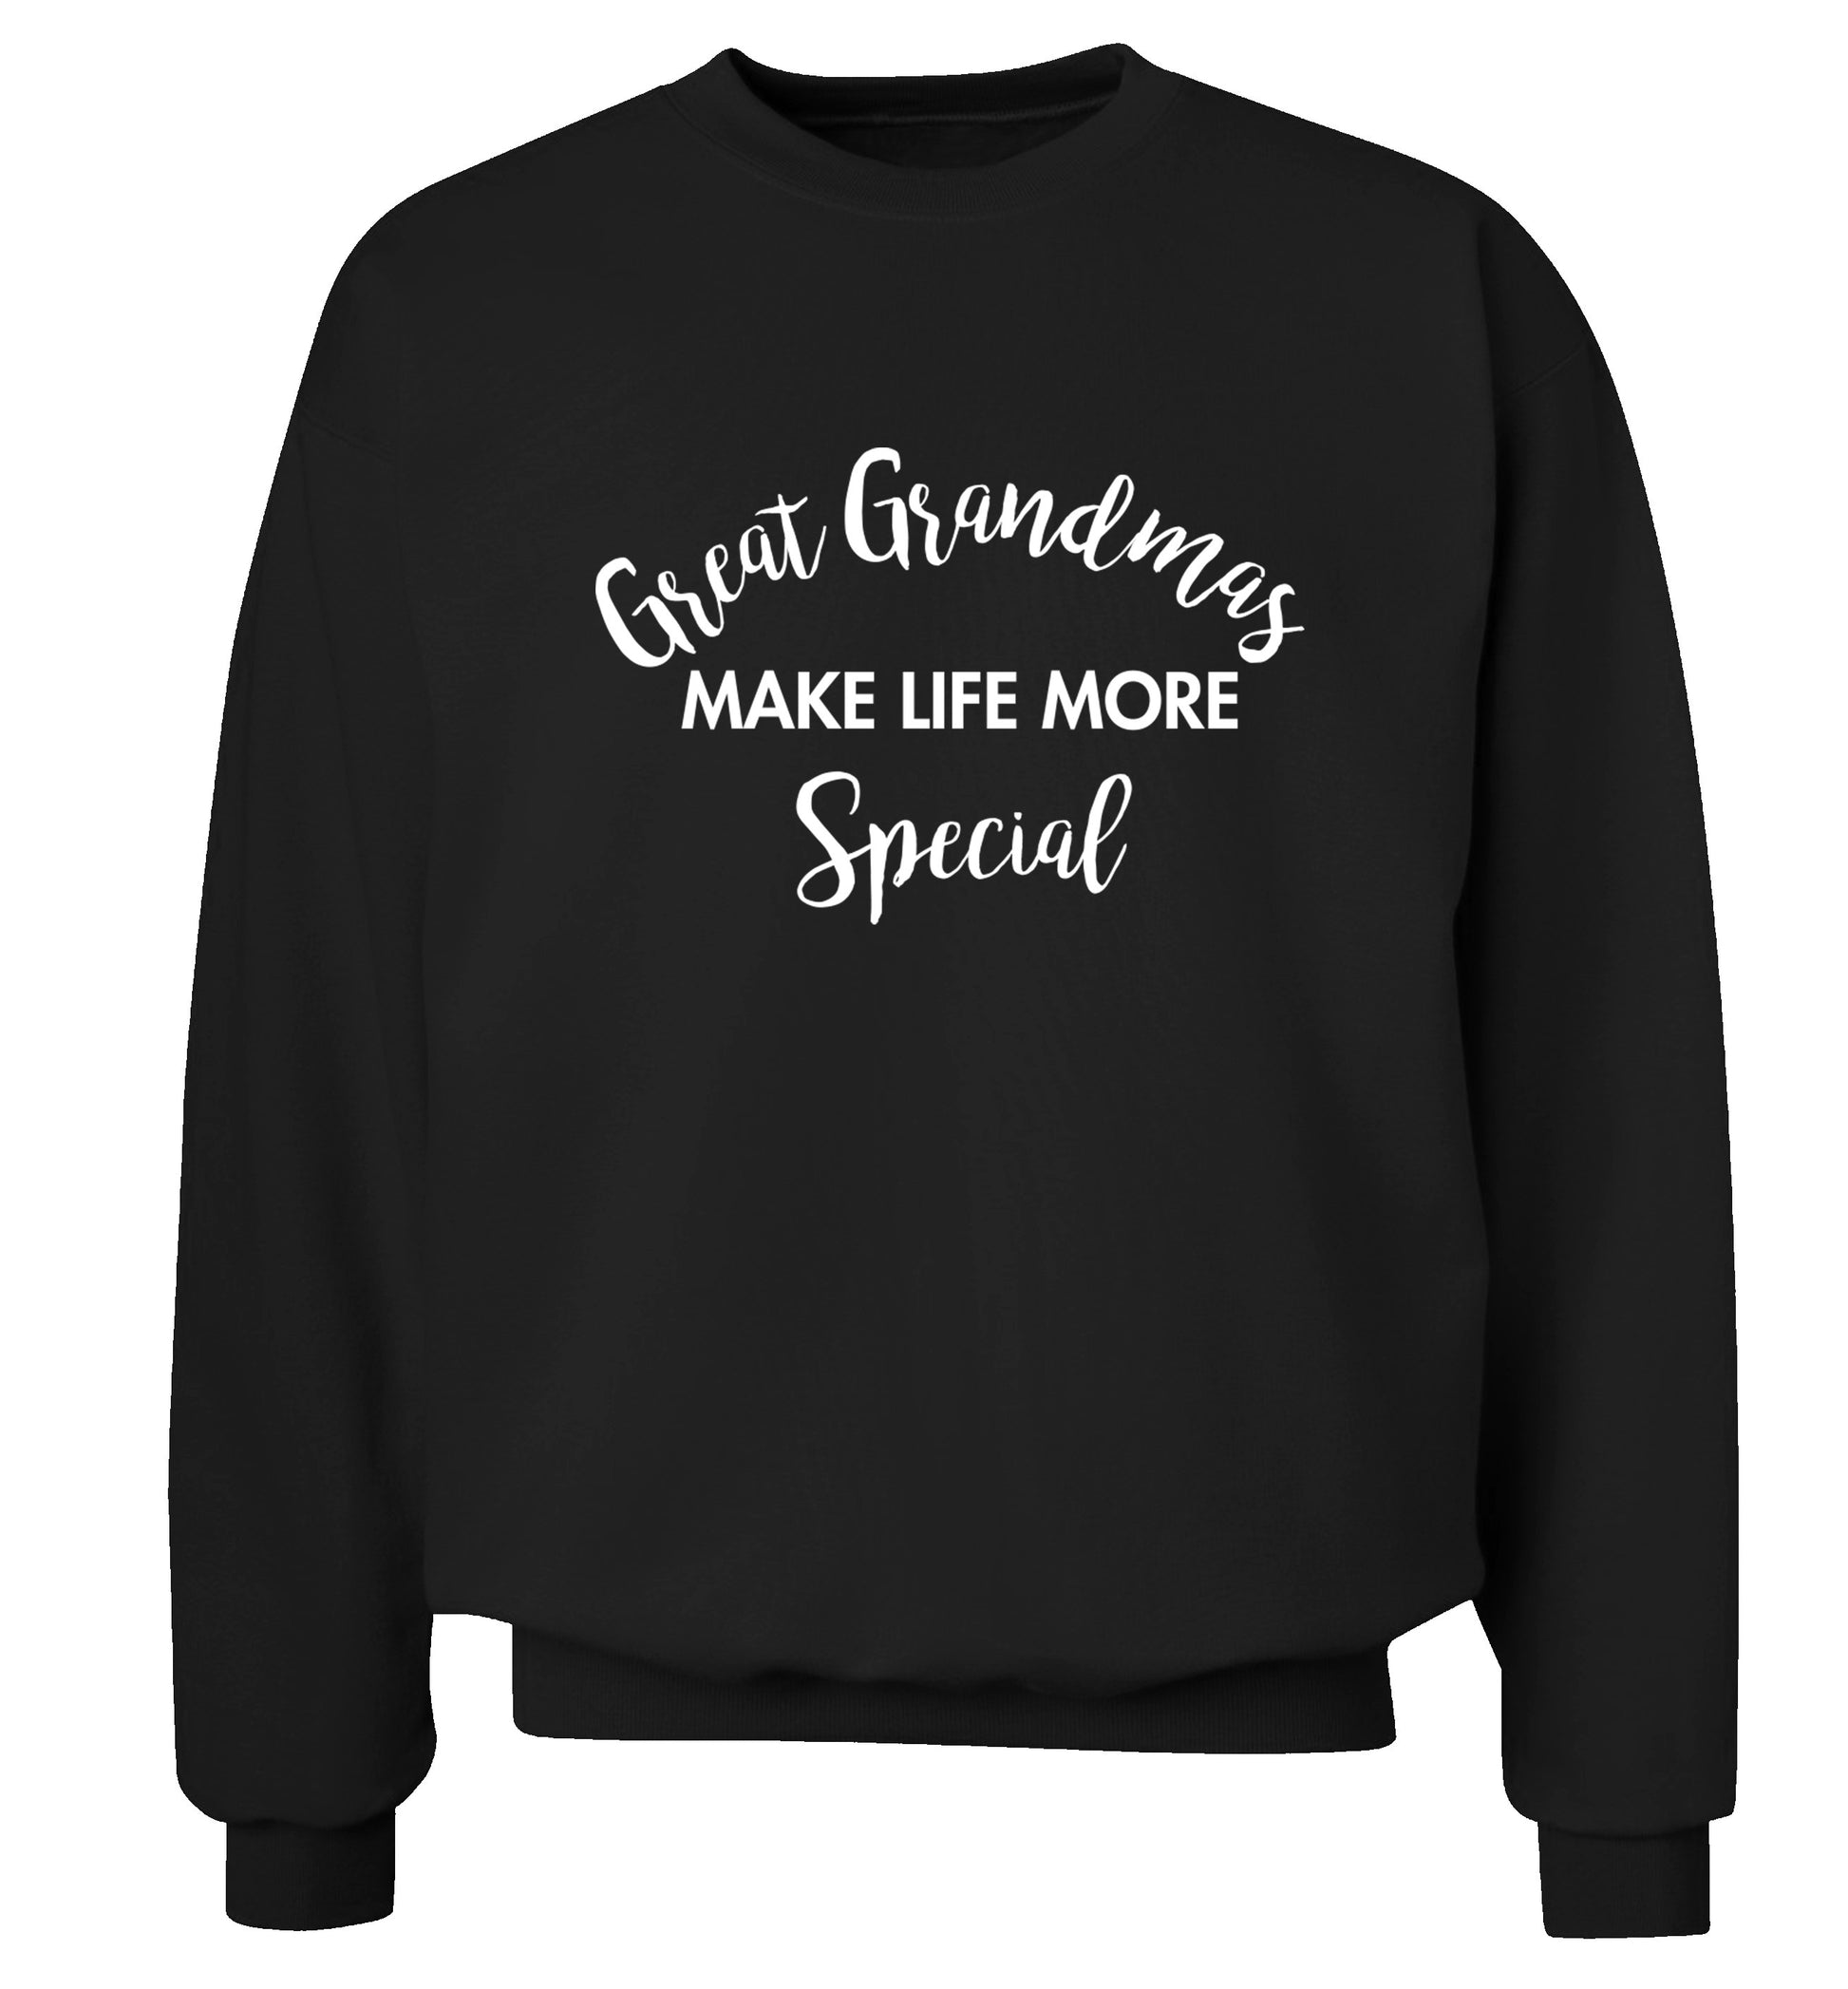 Great Grandmas make life more special Adult's unisex black Sweater 2XL